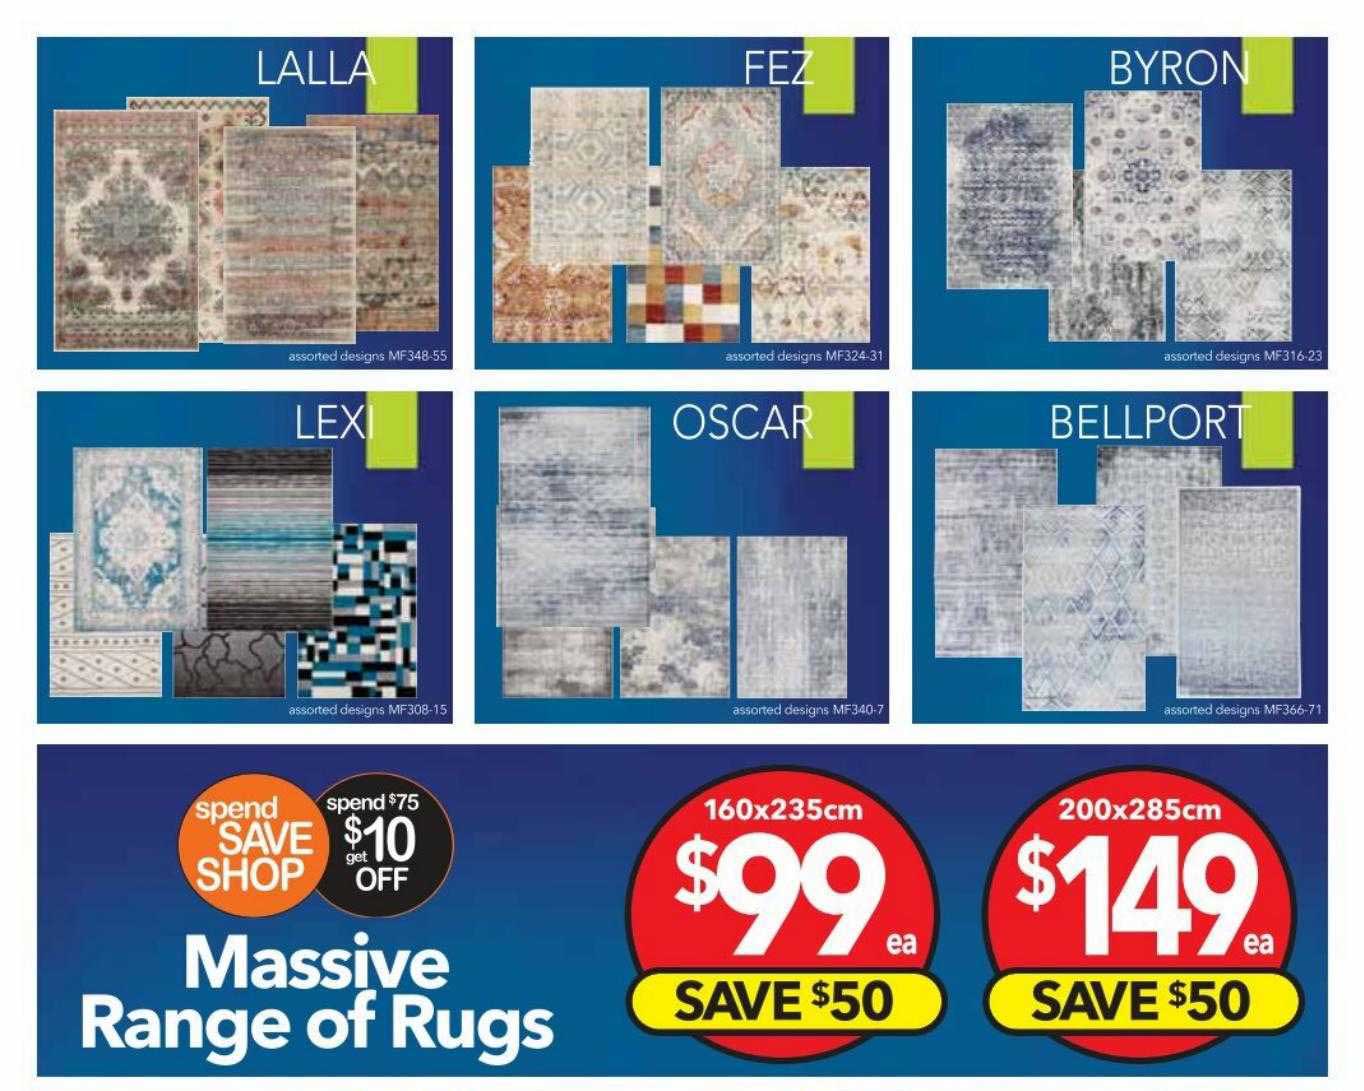 Cheap As Chips Massive Range Or Rugs